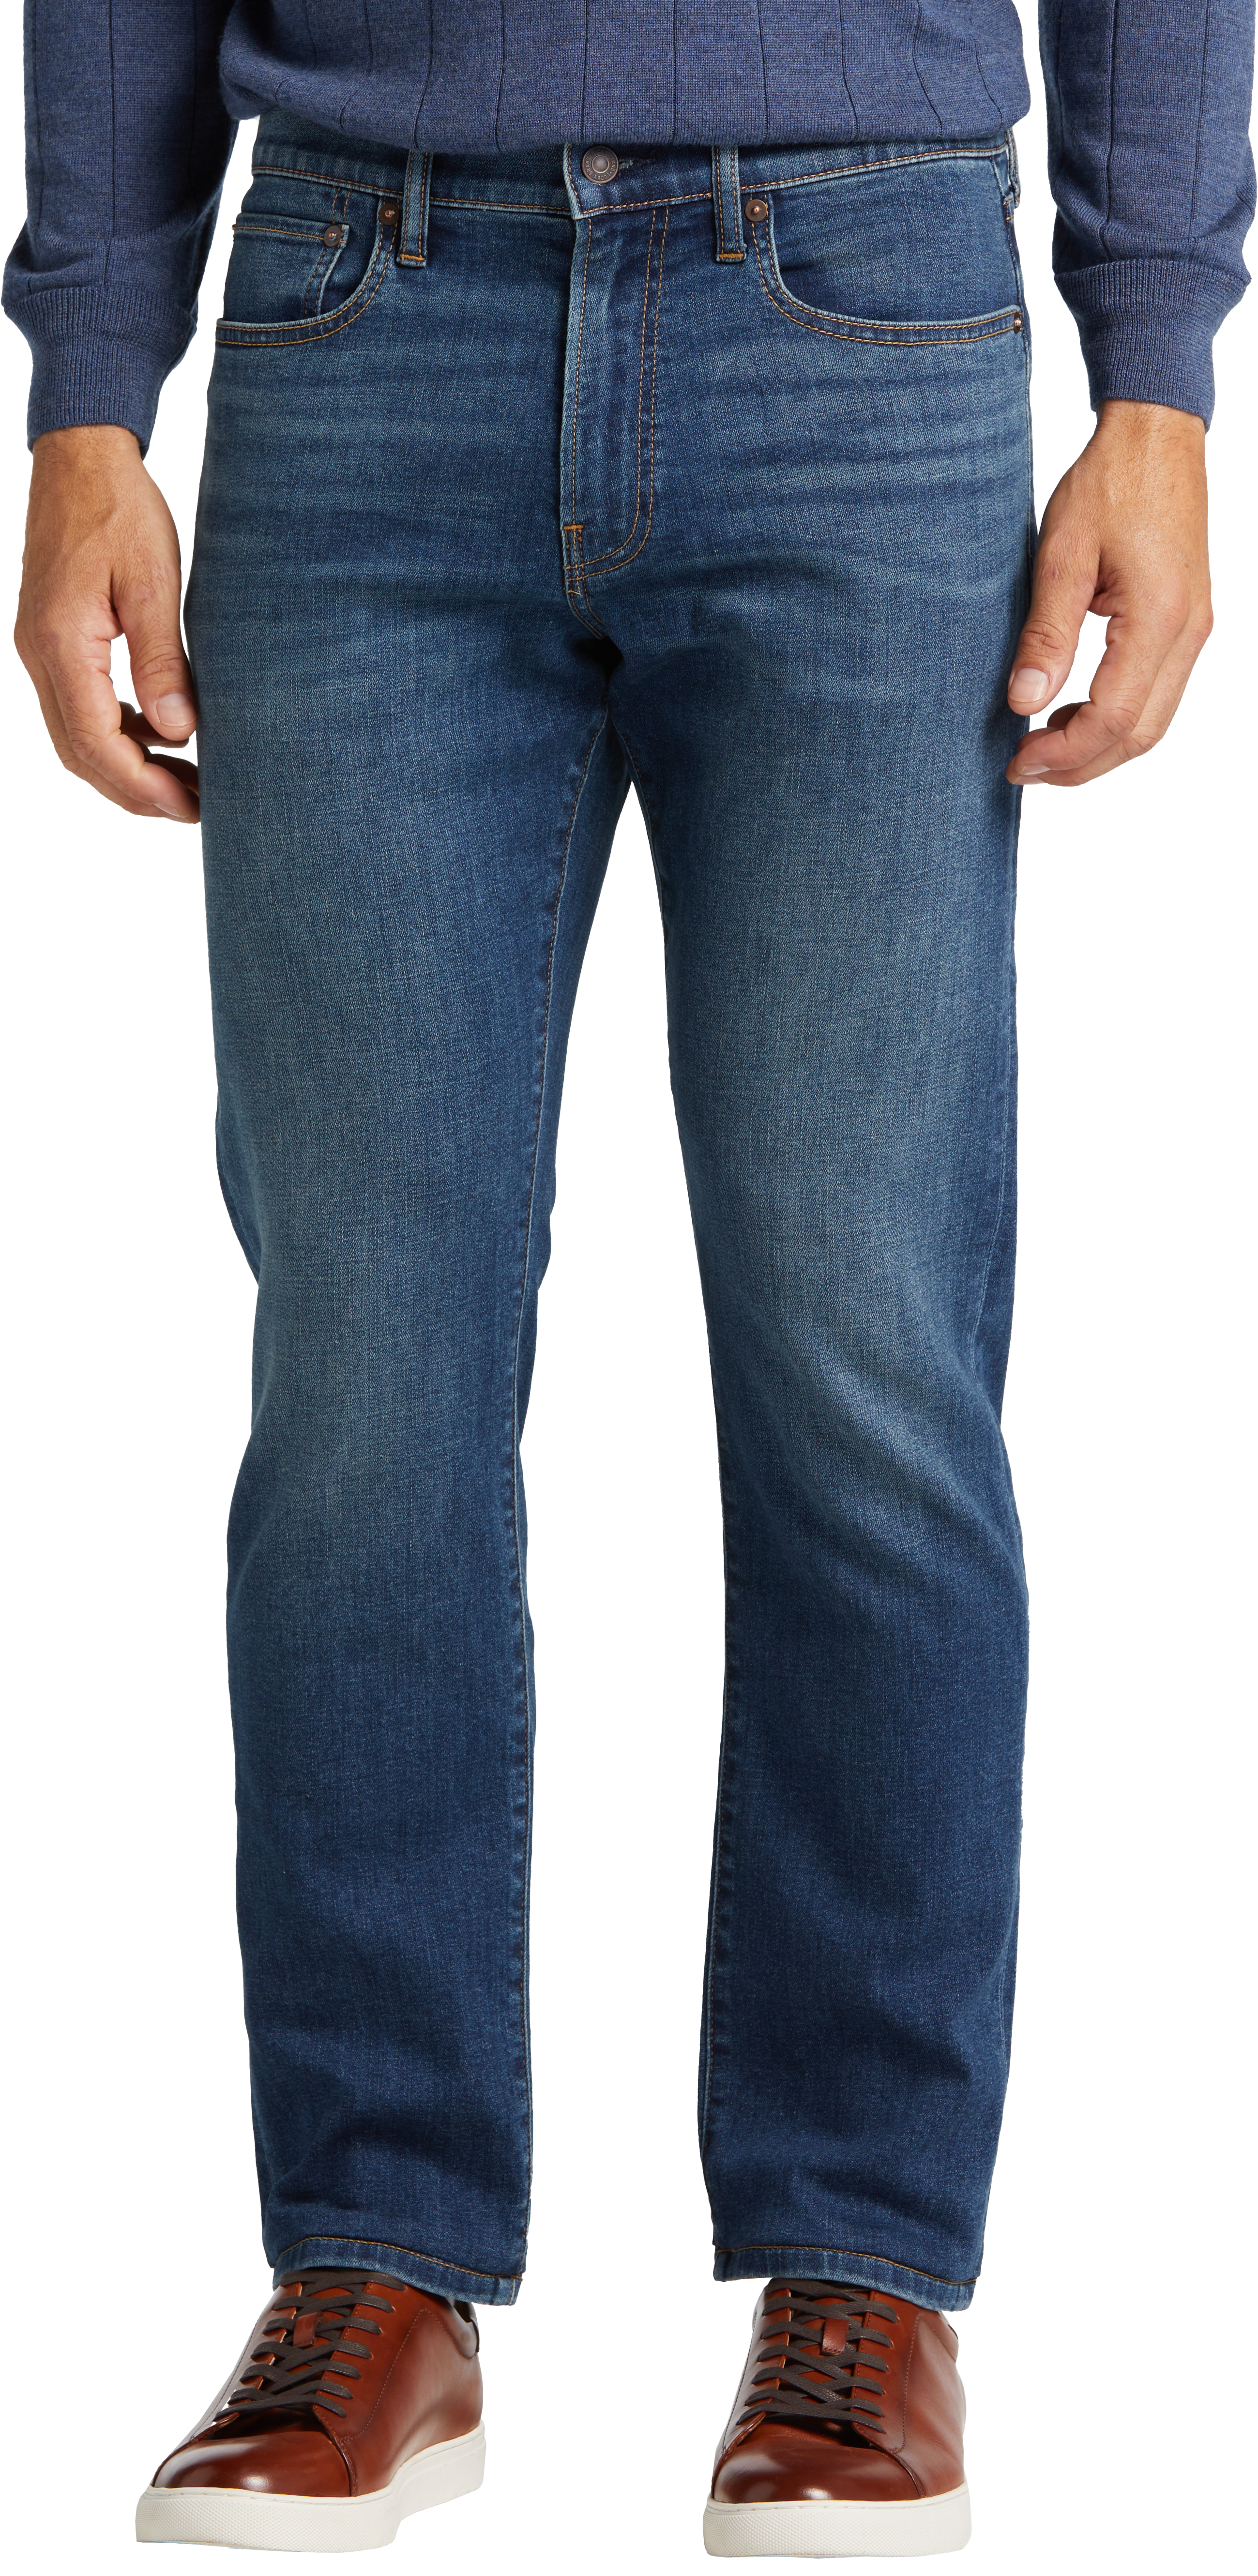 410 Suffolk Athletic Fit Jeans